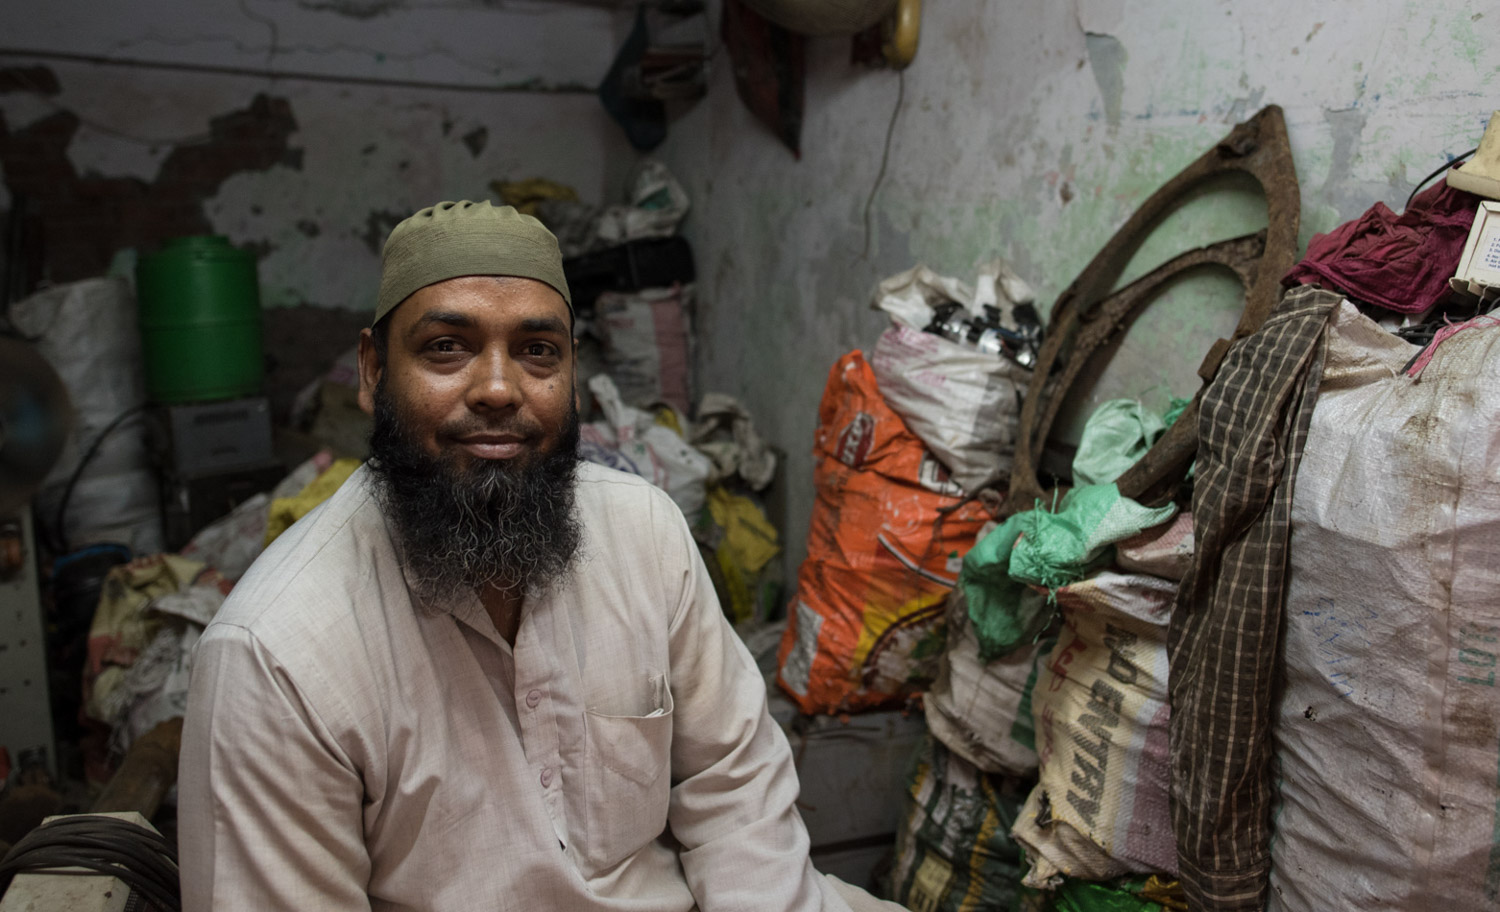 Farook Ahmed, an iron and wiring expert, has been dismantling electronics for 15 years, and he hopes to pass his business to his toddler son.